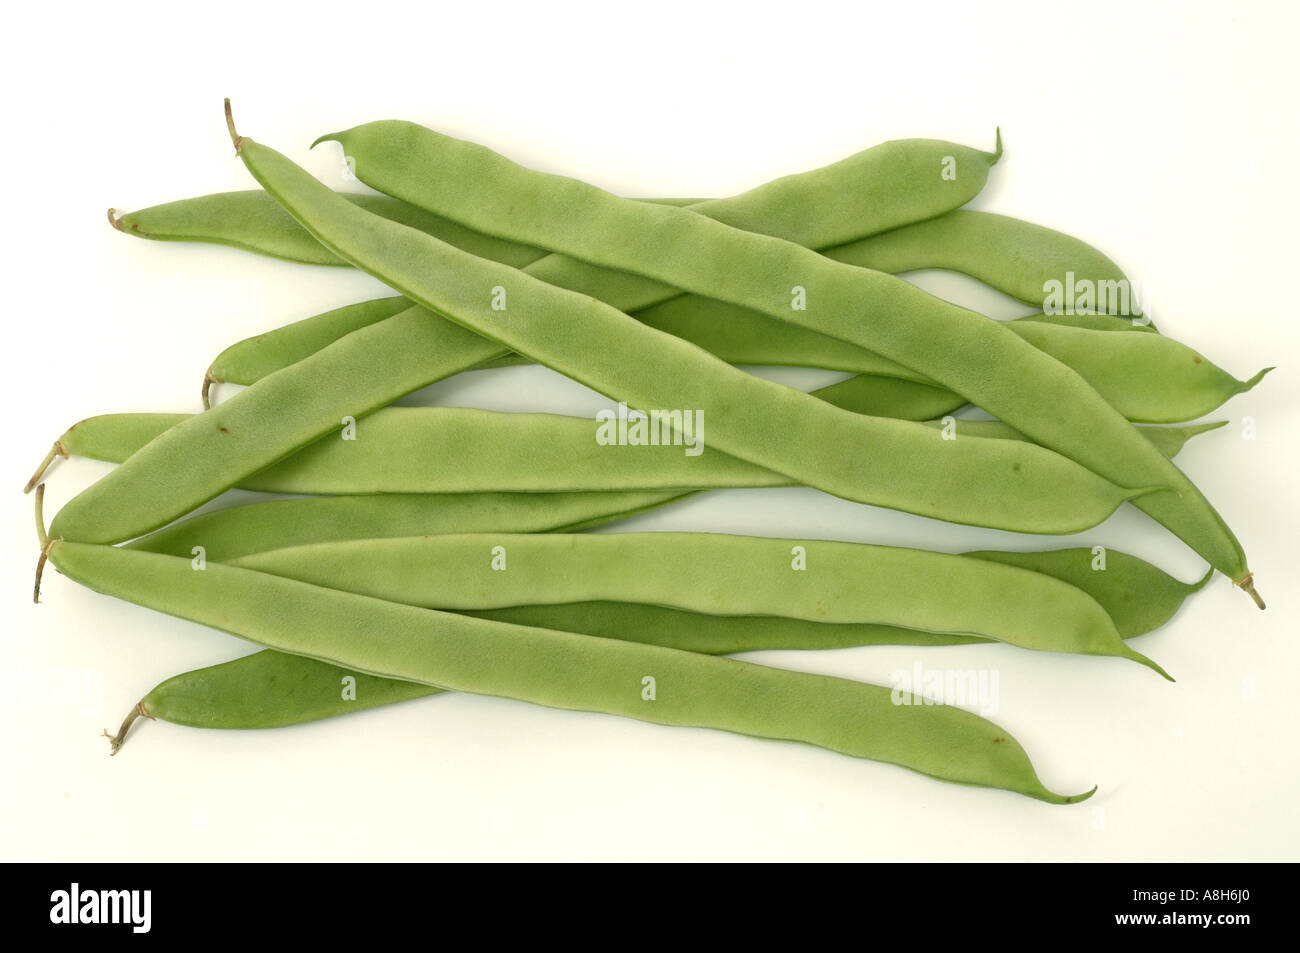 Vegetable produce typical supermarket bought flat or green beans Stock Photo